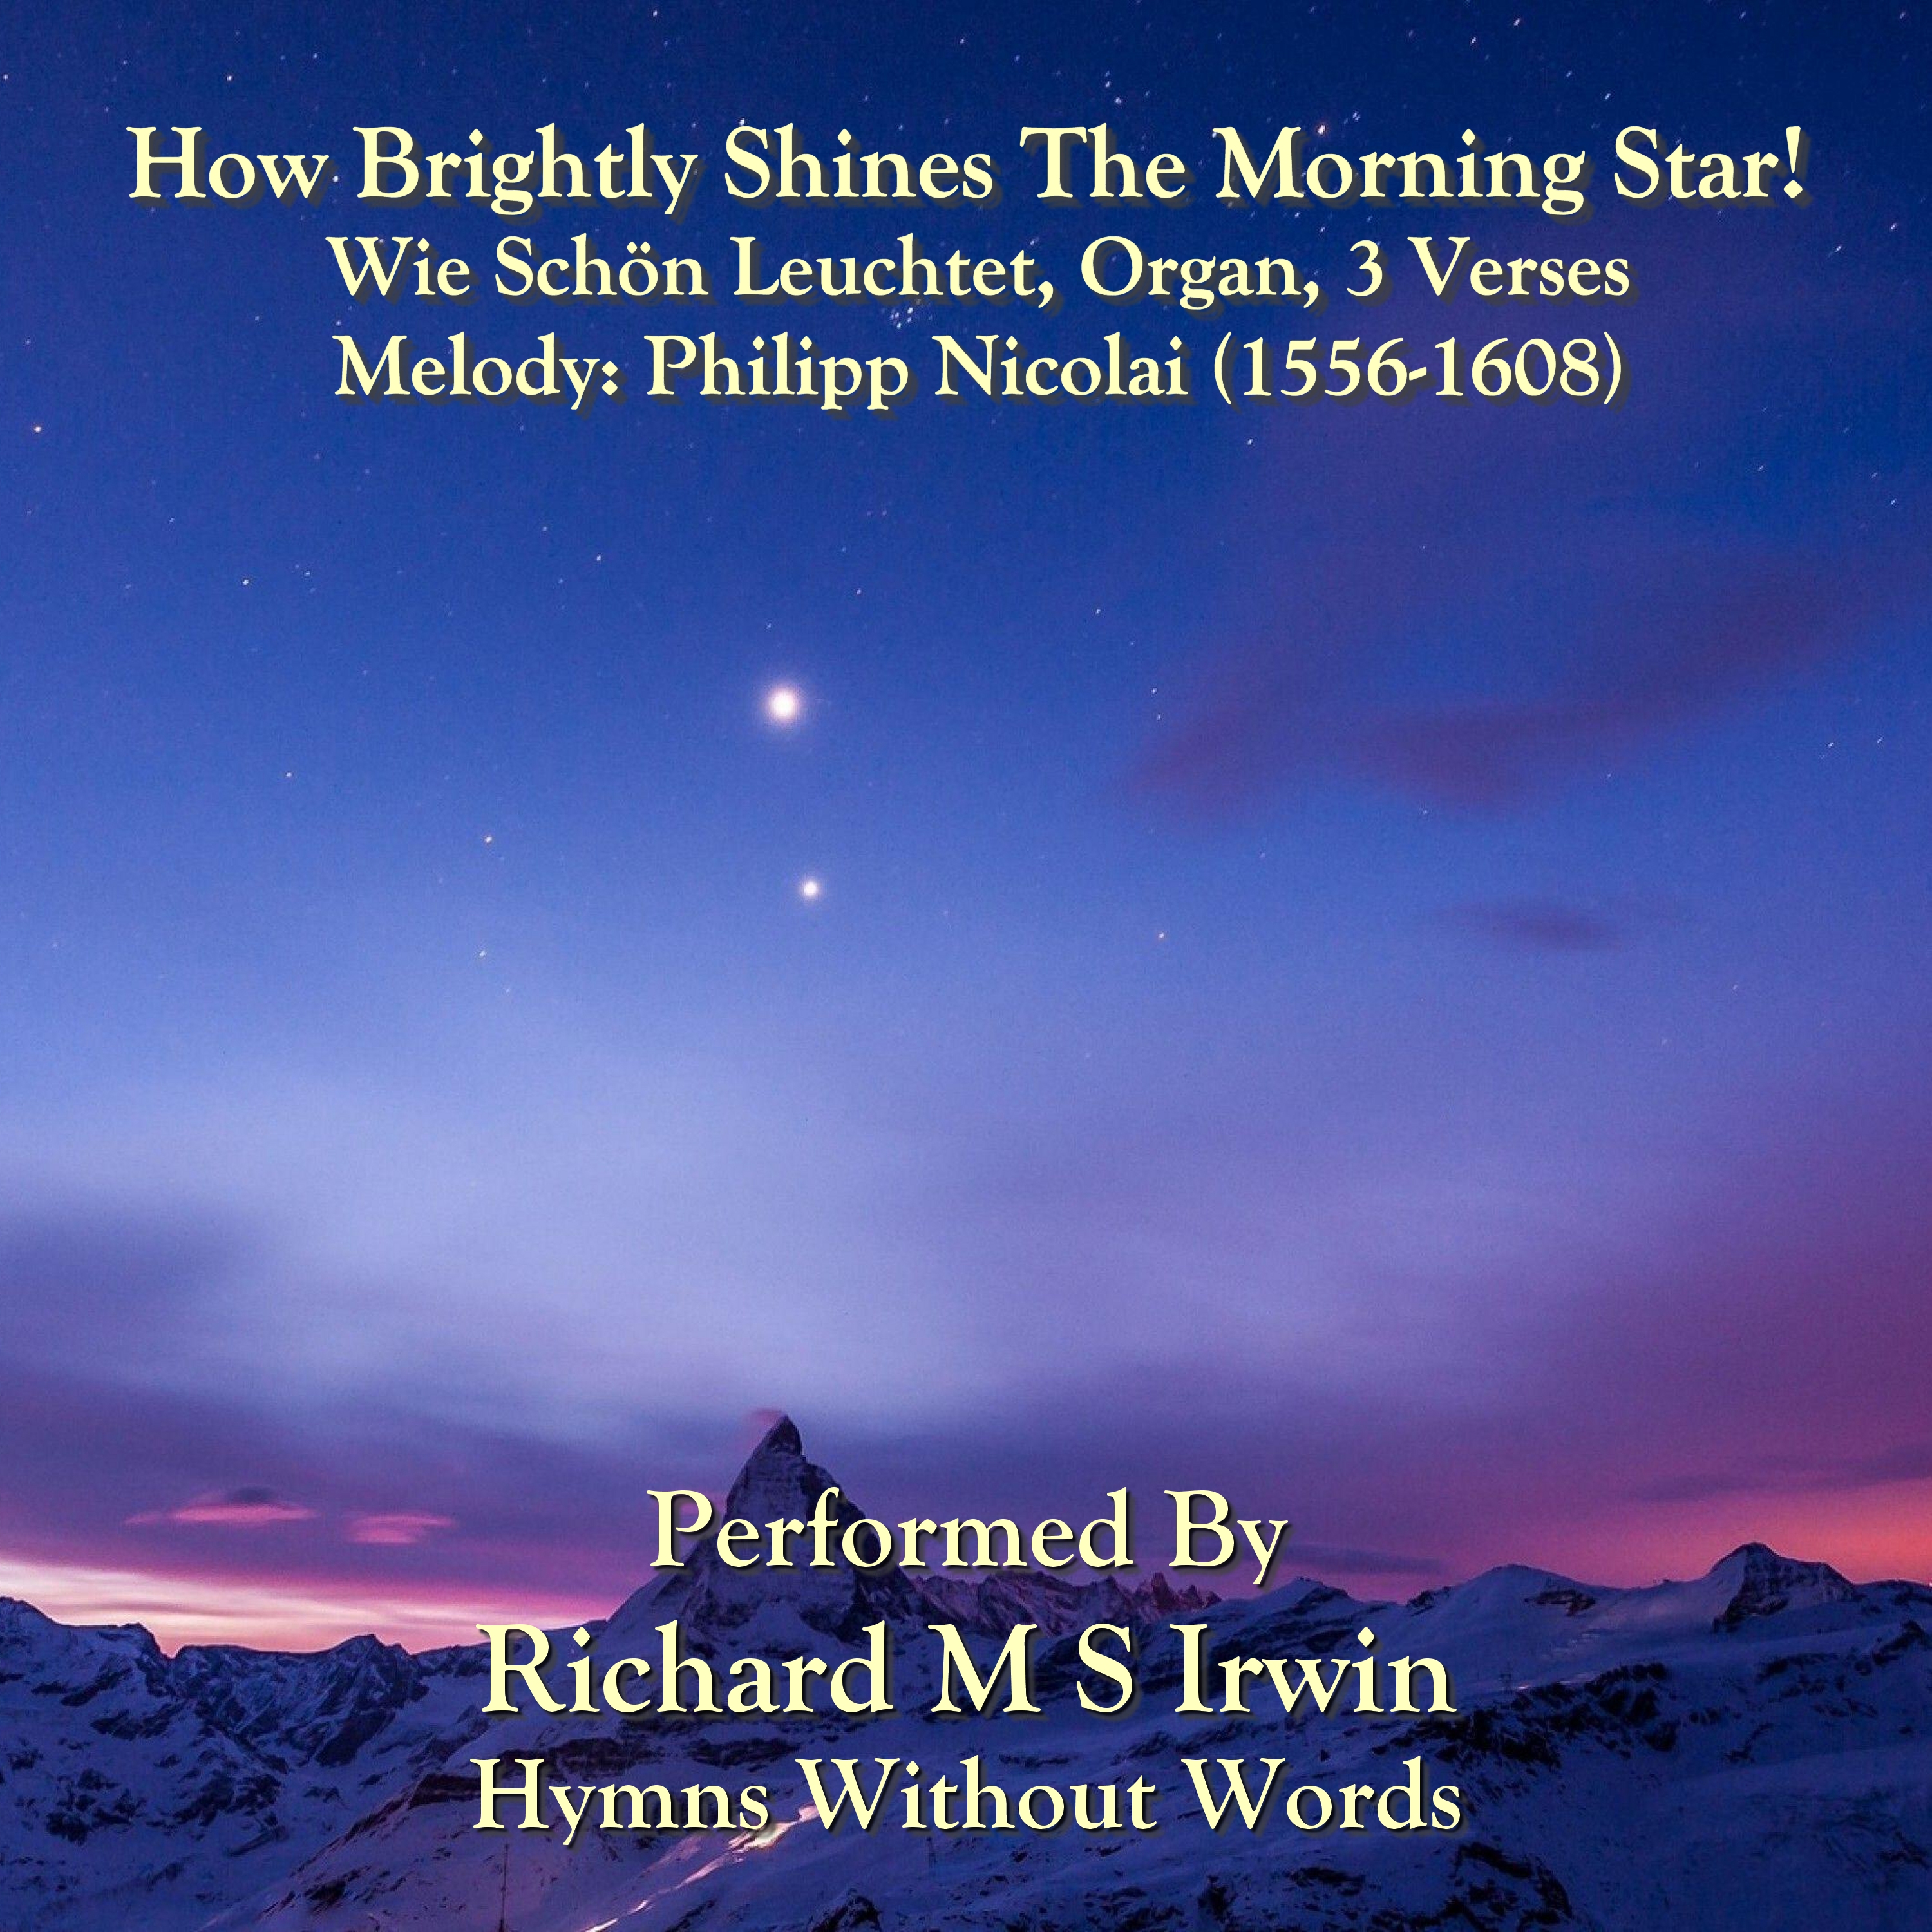 How Brightly Shines The Morning Star